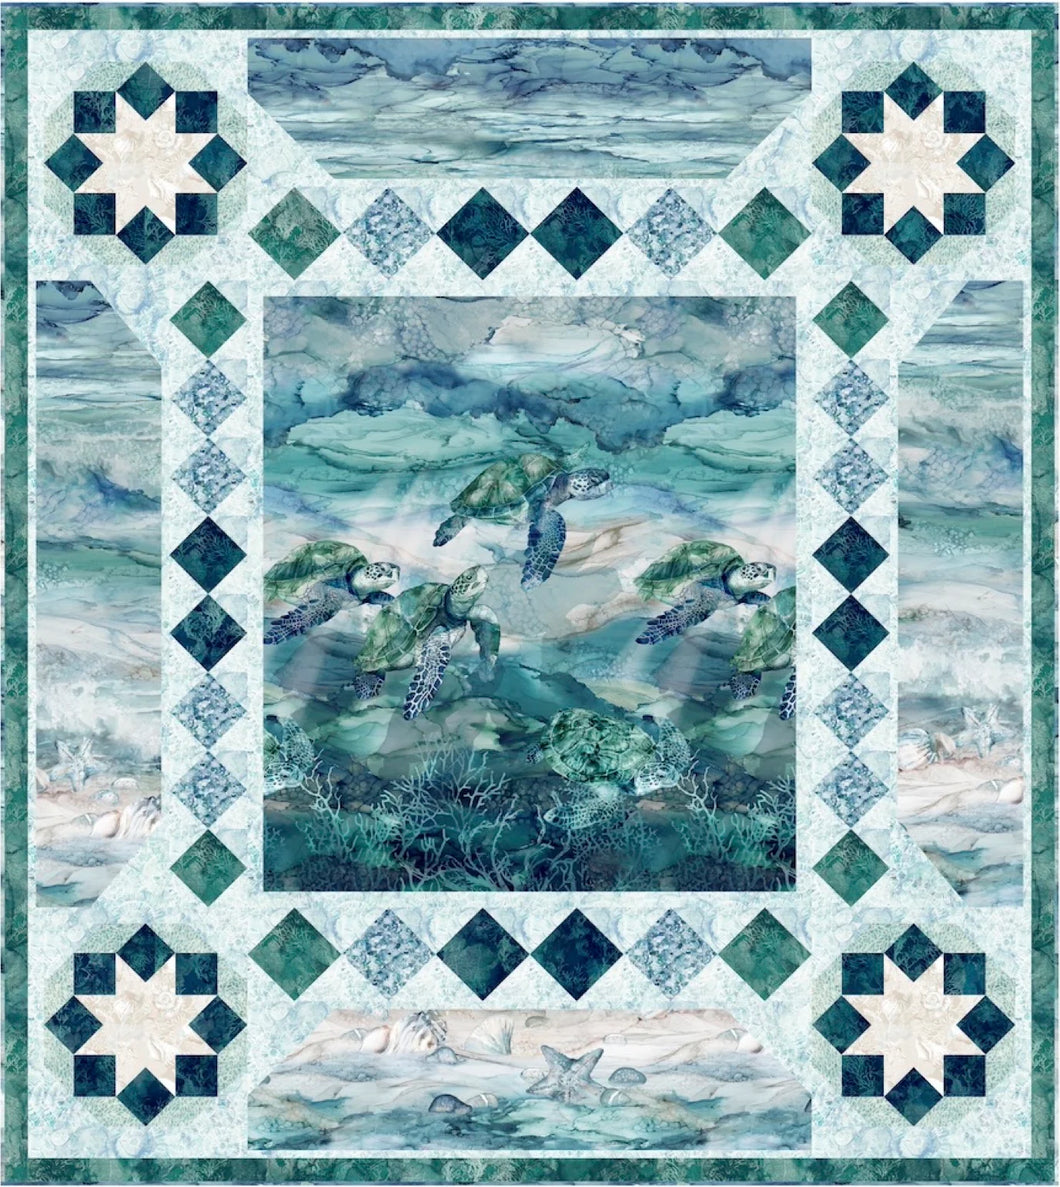 Quilt Kit - Sea Travelers by Pine Tree Country Quilts